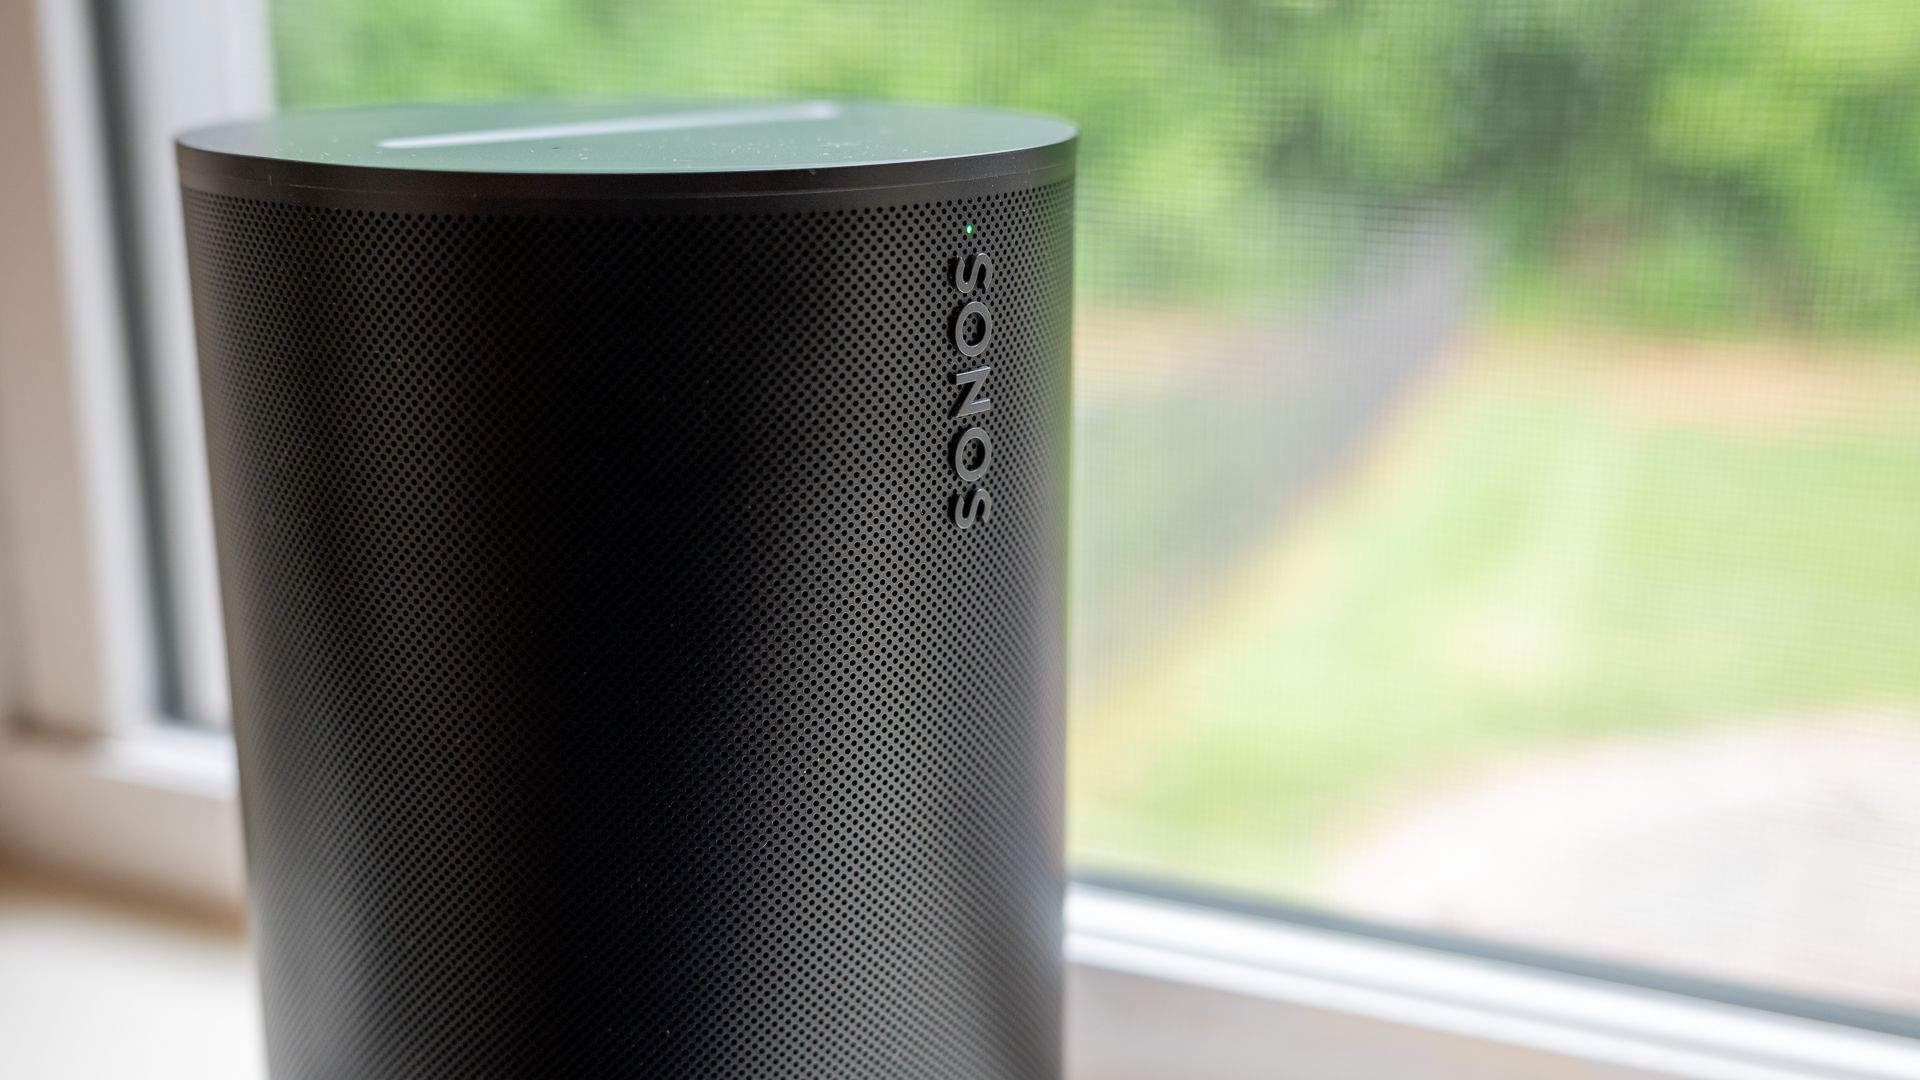 Sonos logo and speaker grill on the front of the Sonos Era 100